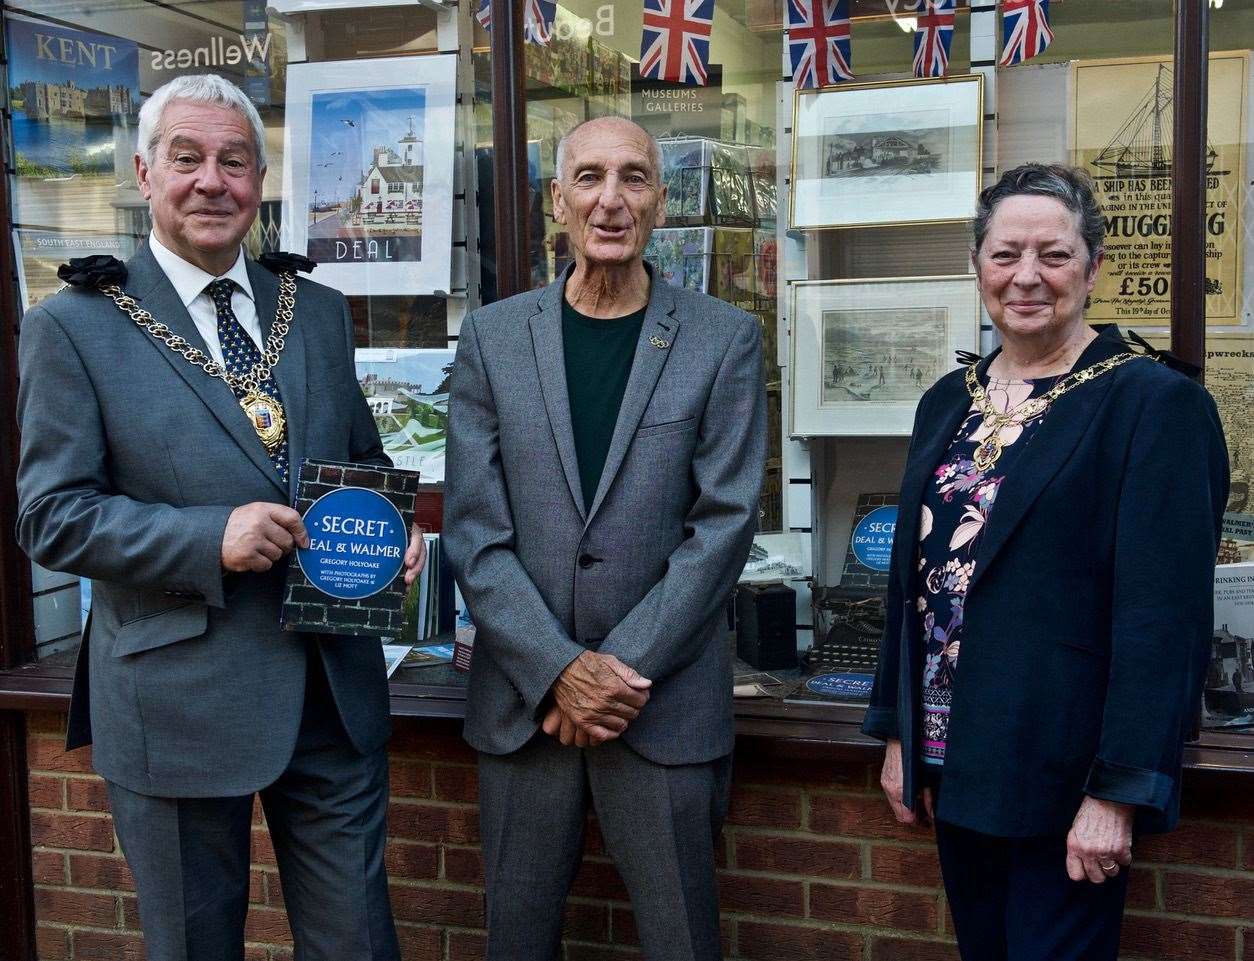 Cllr Chris Turner (left) and his Mayoress, Kate Gatti with historian, Gregory Holyoake at the launch of Secret Deal and Walmer by Amberley Publishing at Roper's stationers. Picture Liz Mott